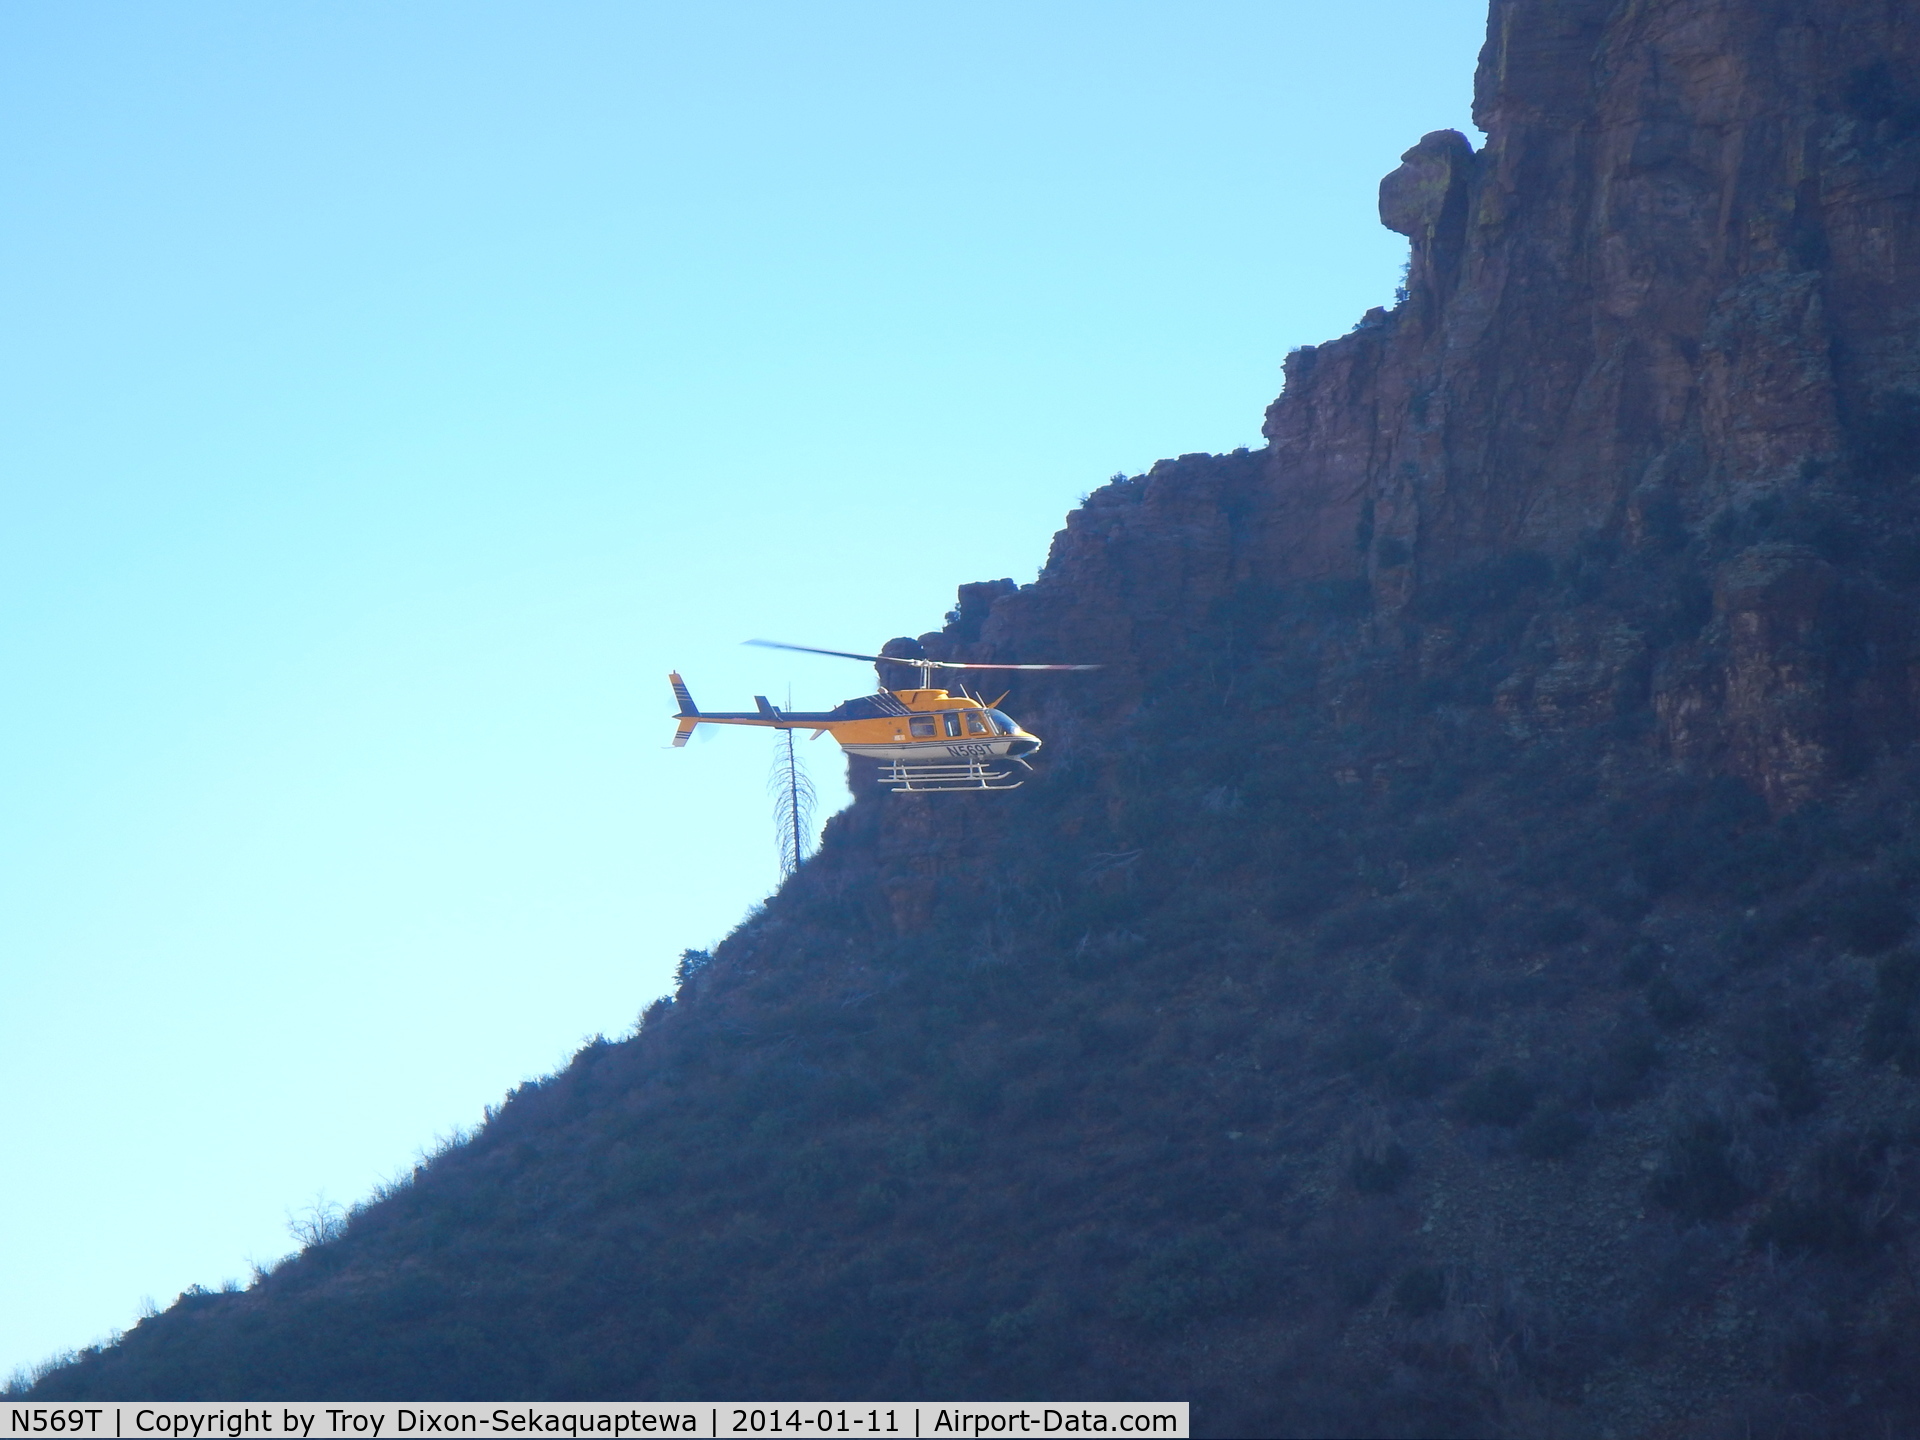 N569T, 2004 Bell 206L-4 LongRanger IV LongRanger C/N 52290, January of 2014 I was hiking to Indian ruins in Devil's Chasm canyon Arizona.  This Helicopter (N569T) flew through the canyon. I'm not sure who's view was better, theirs or ours.